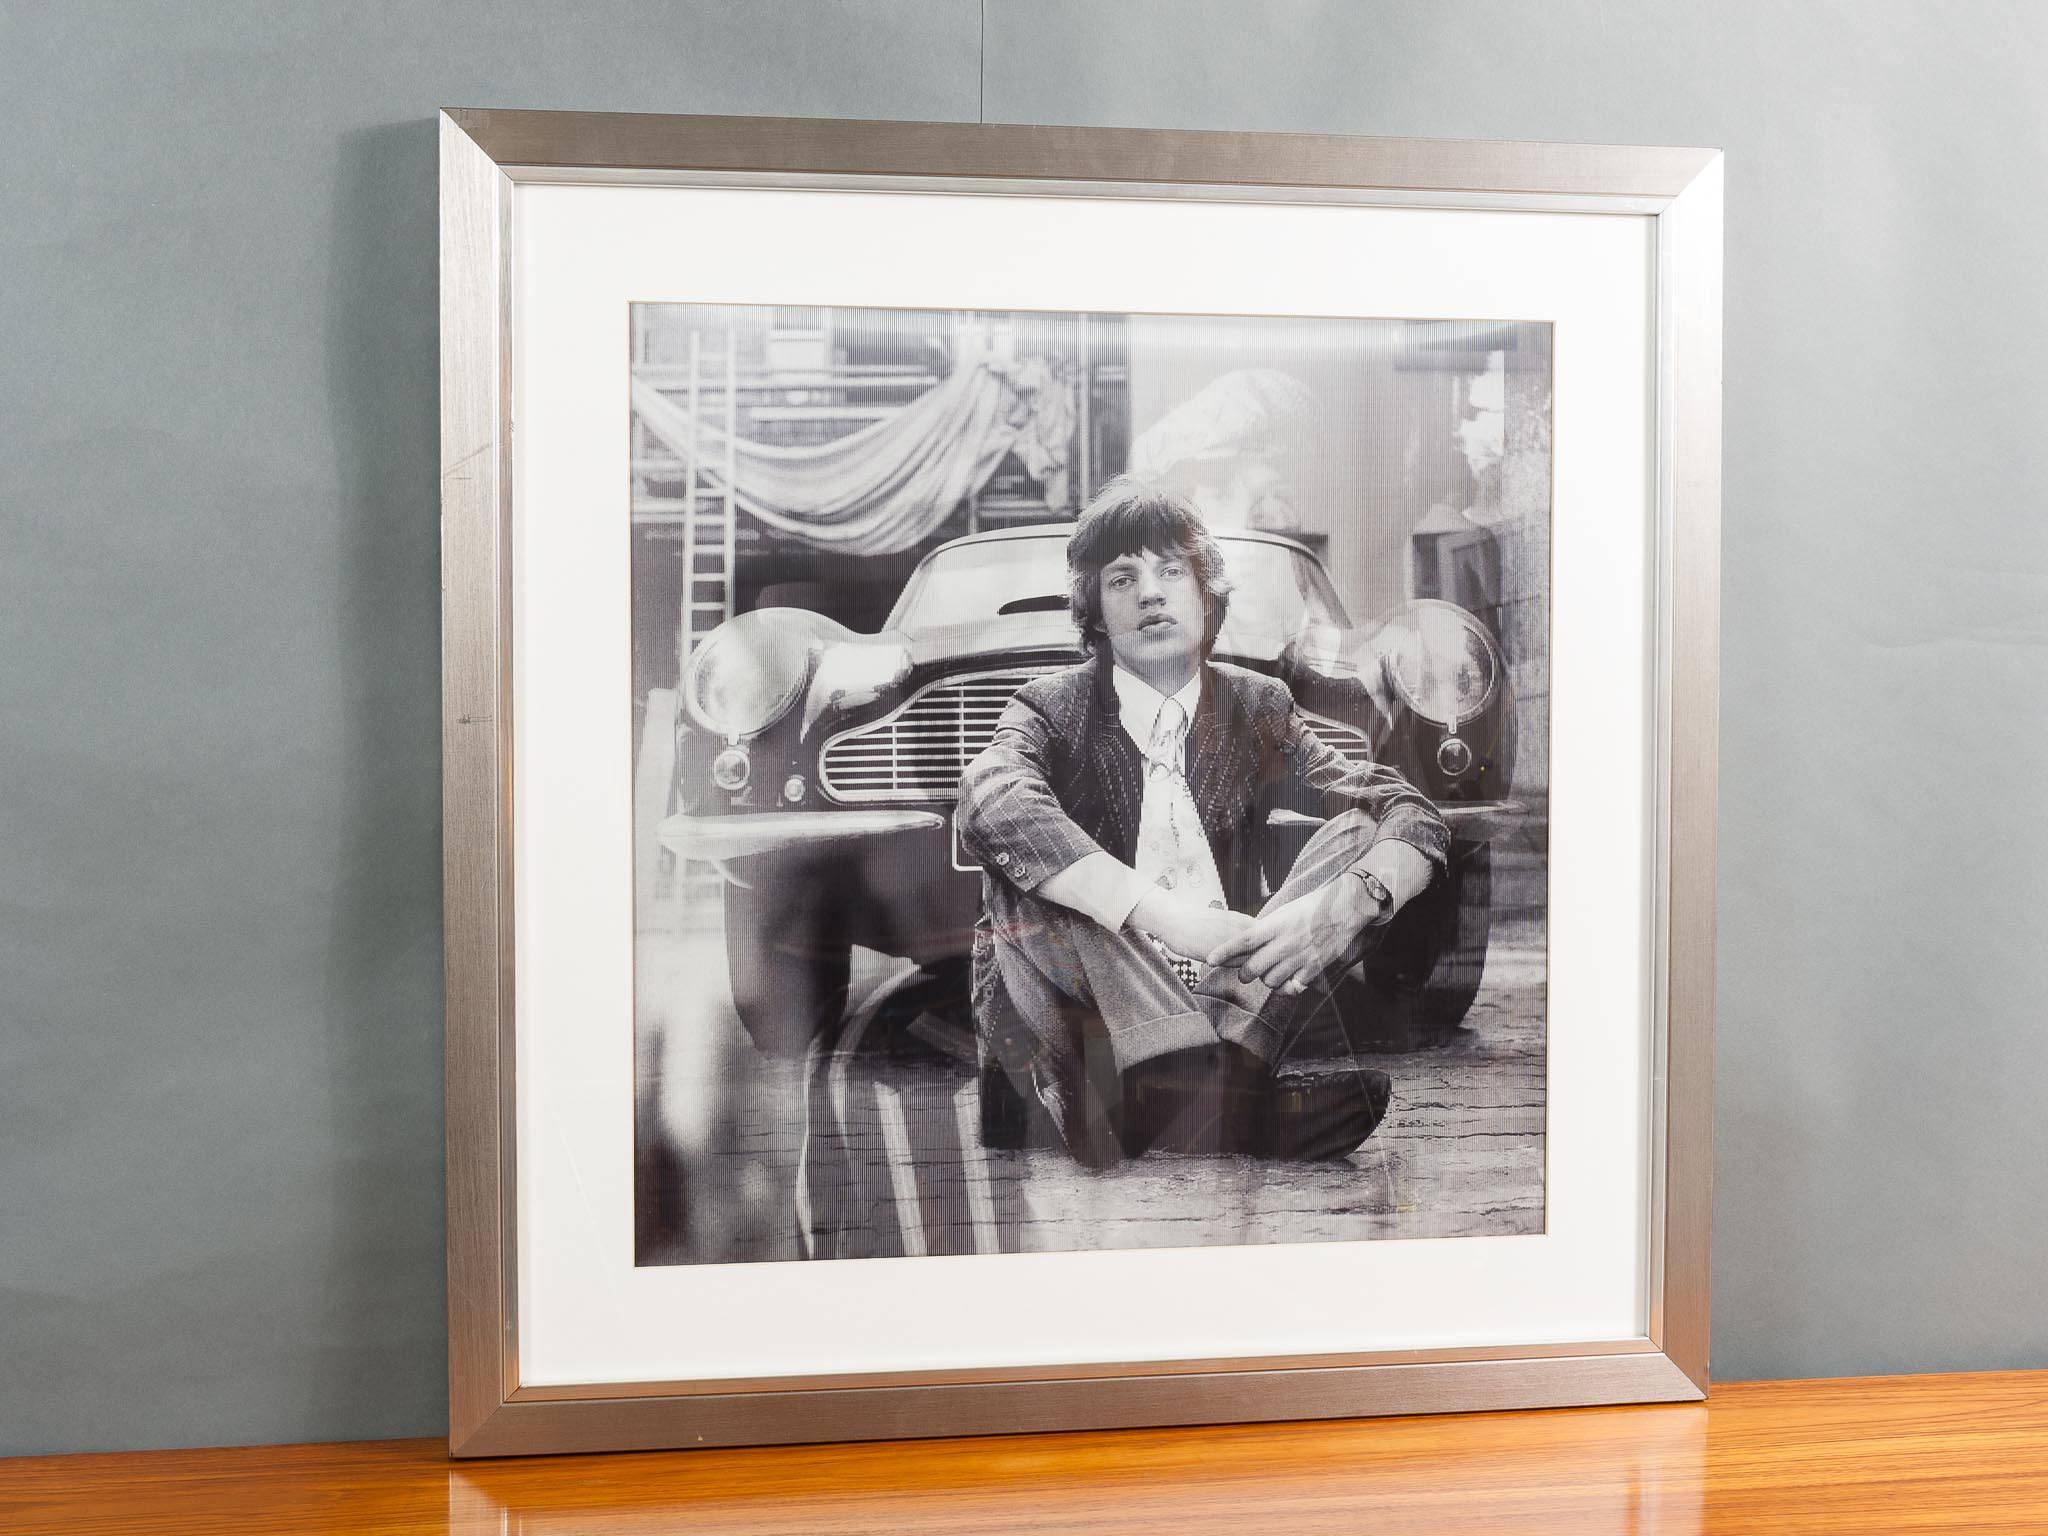 Large lenticular showing four different images of the Rolling Stone's Mick Jagger in the 1960s. Designed by Matthew Andrews. An amazing and striking piece in a silver frame.